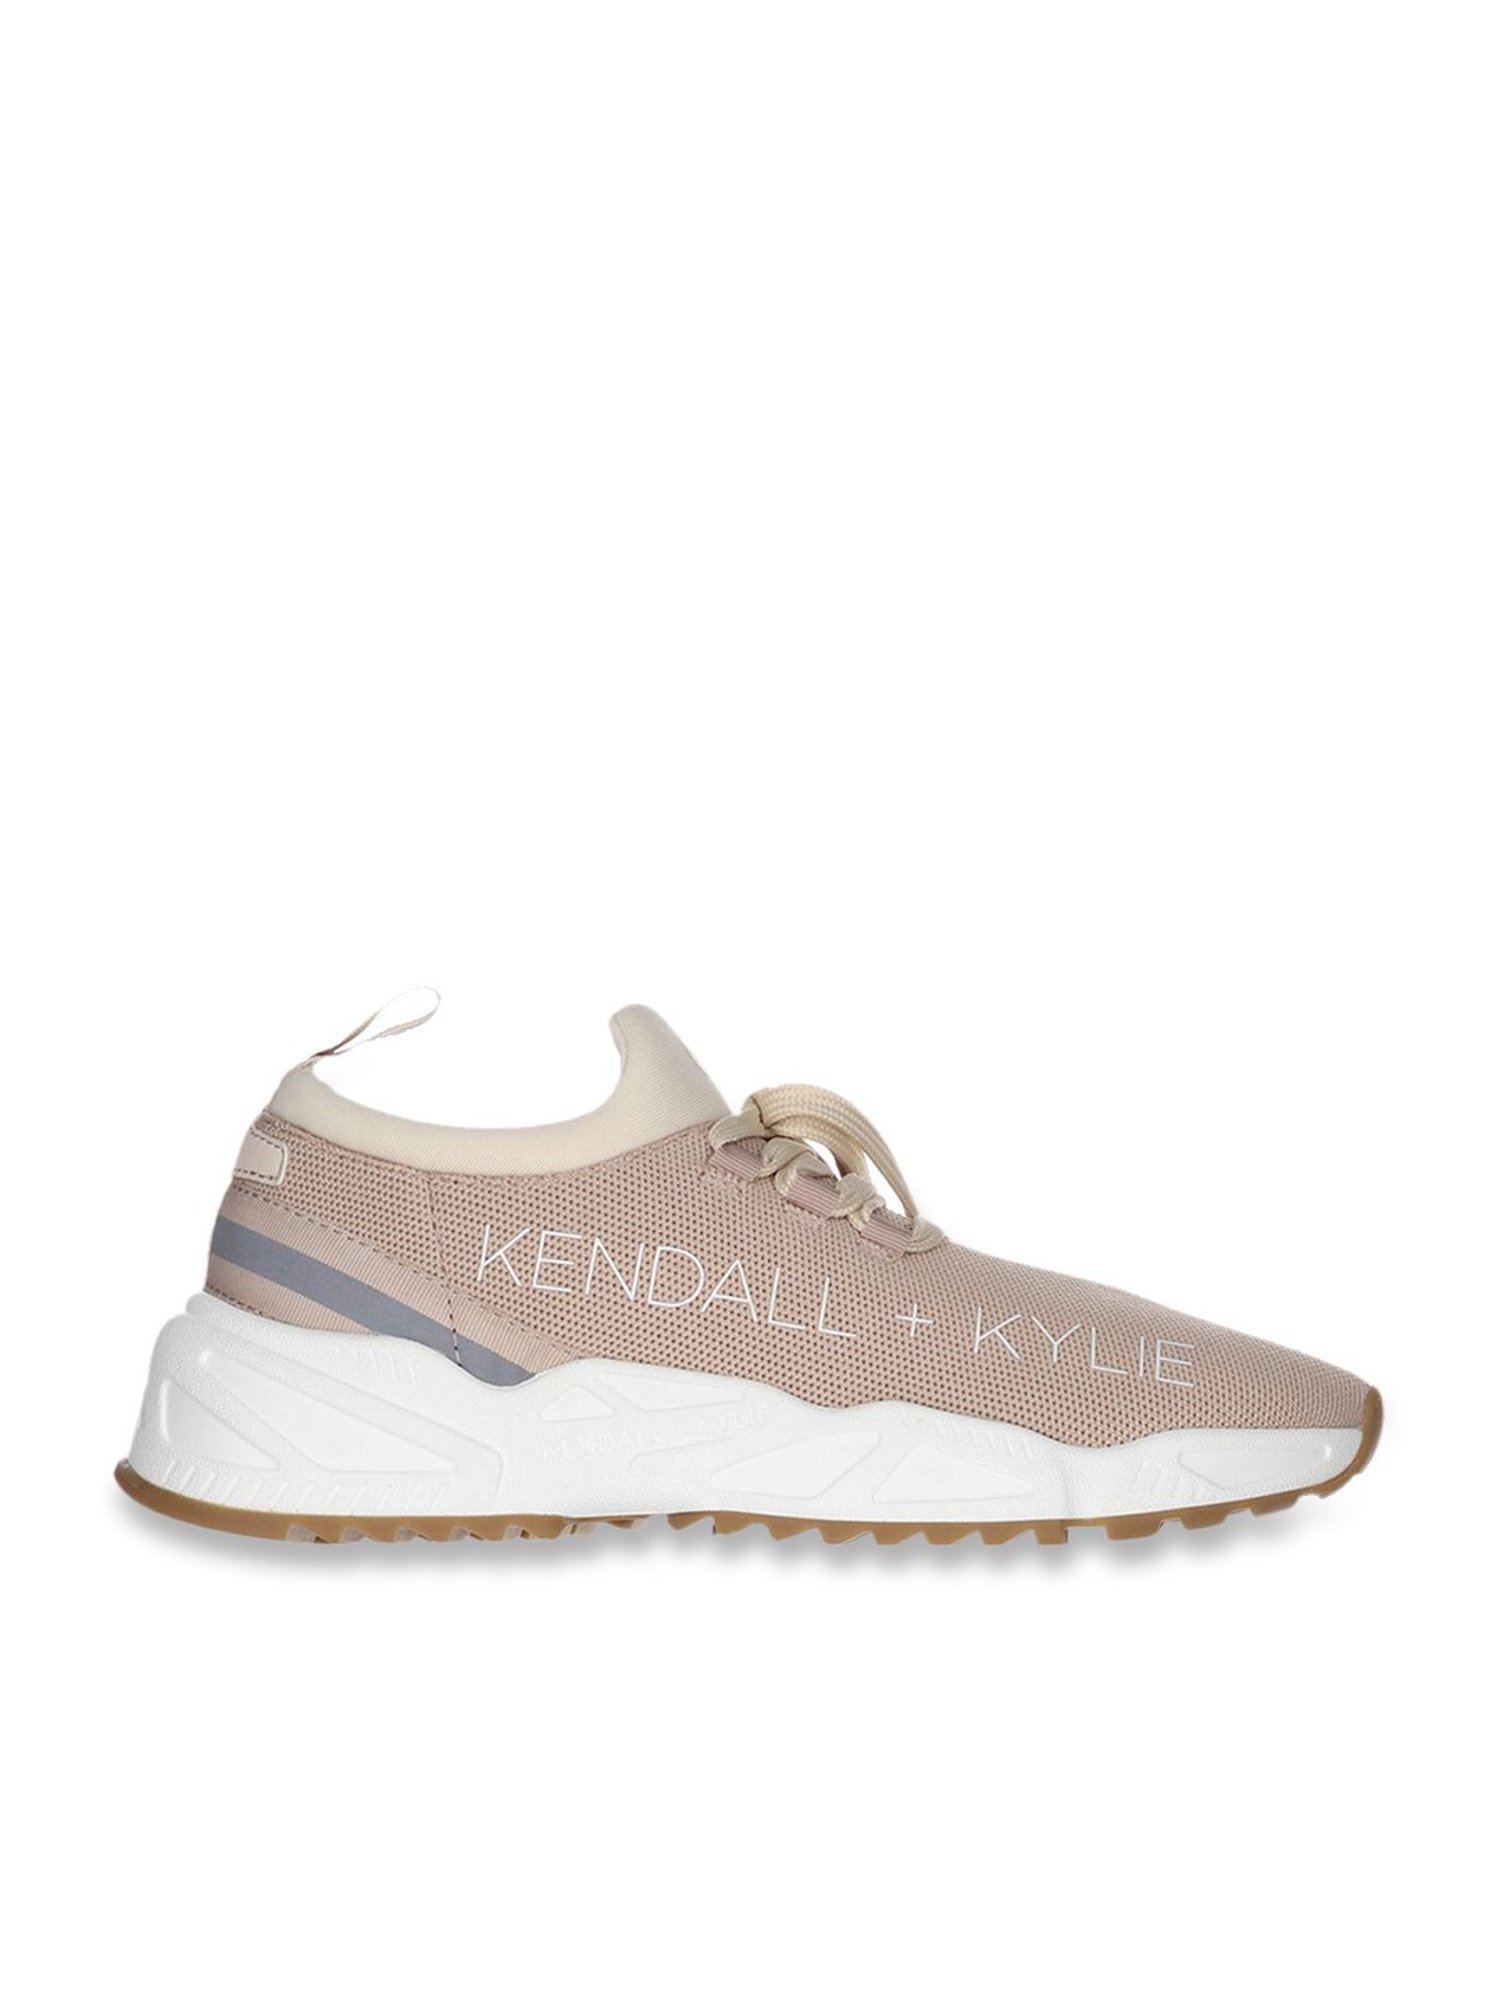 Kendall + Kylie Womens Olea Fitness Lifestyle Casual and Fashion Sneakers |  Sneakers fashion, Sneakers, Kendall + kylie